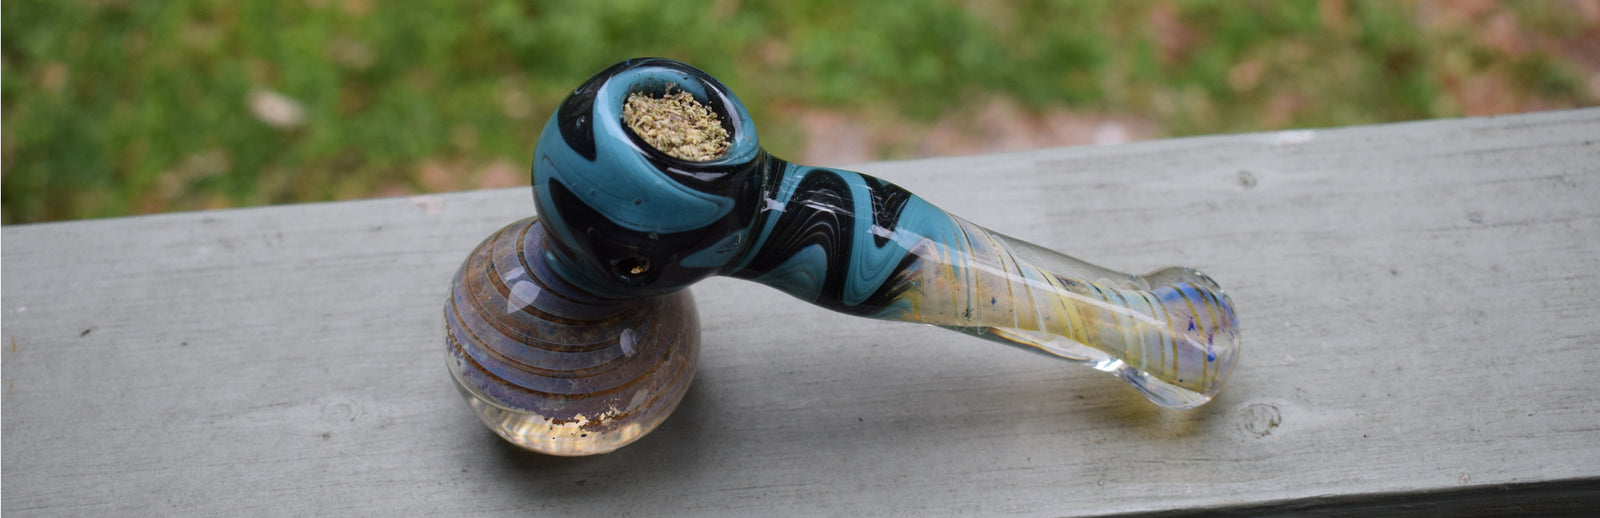 How to Take Care of Cannabis Glassware